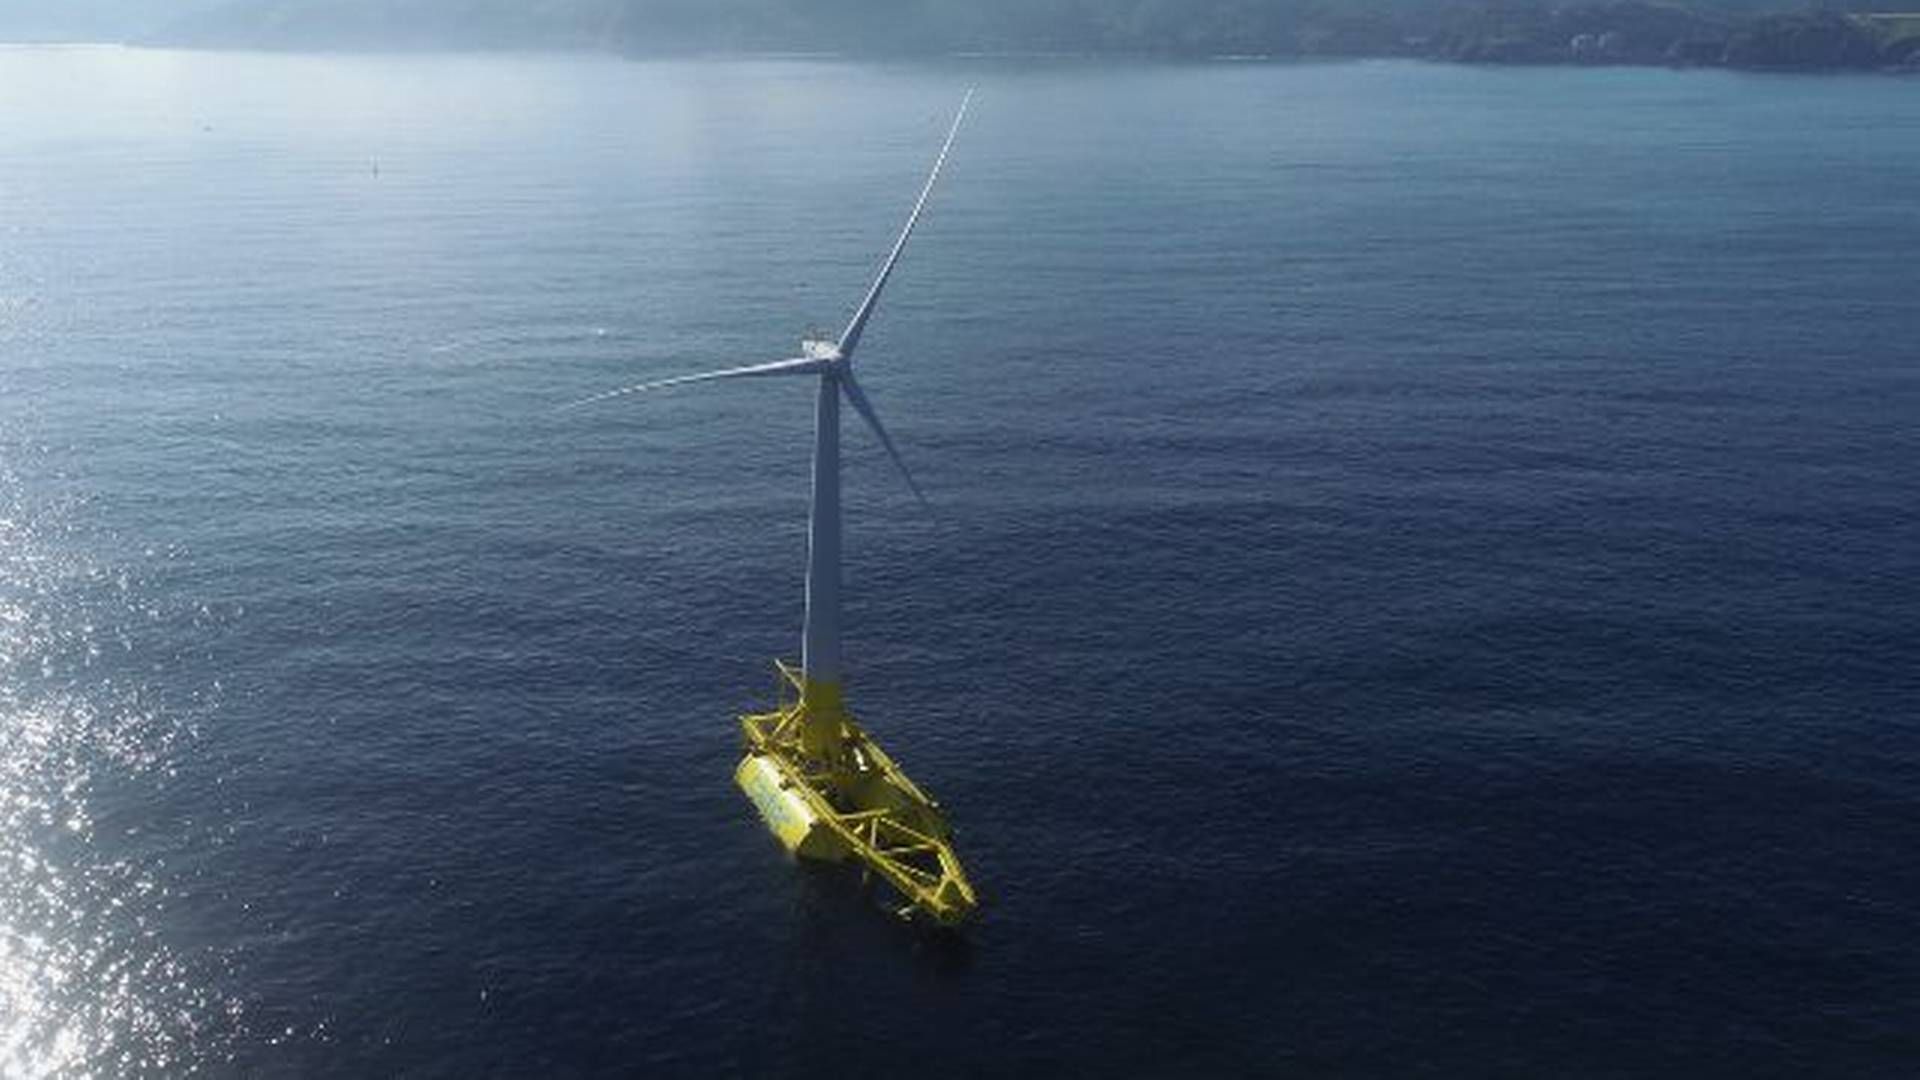 The project consists of a 2 MW wind turbine to be located 2 miles off the Basque coast. | Photo: Pr Saitec